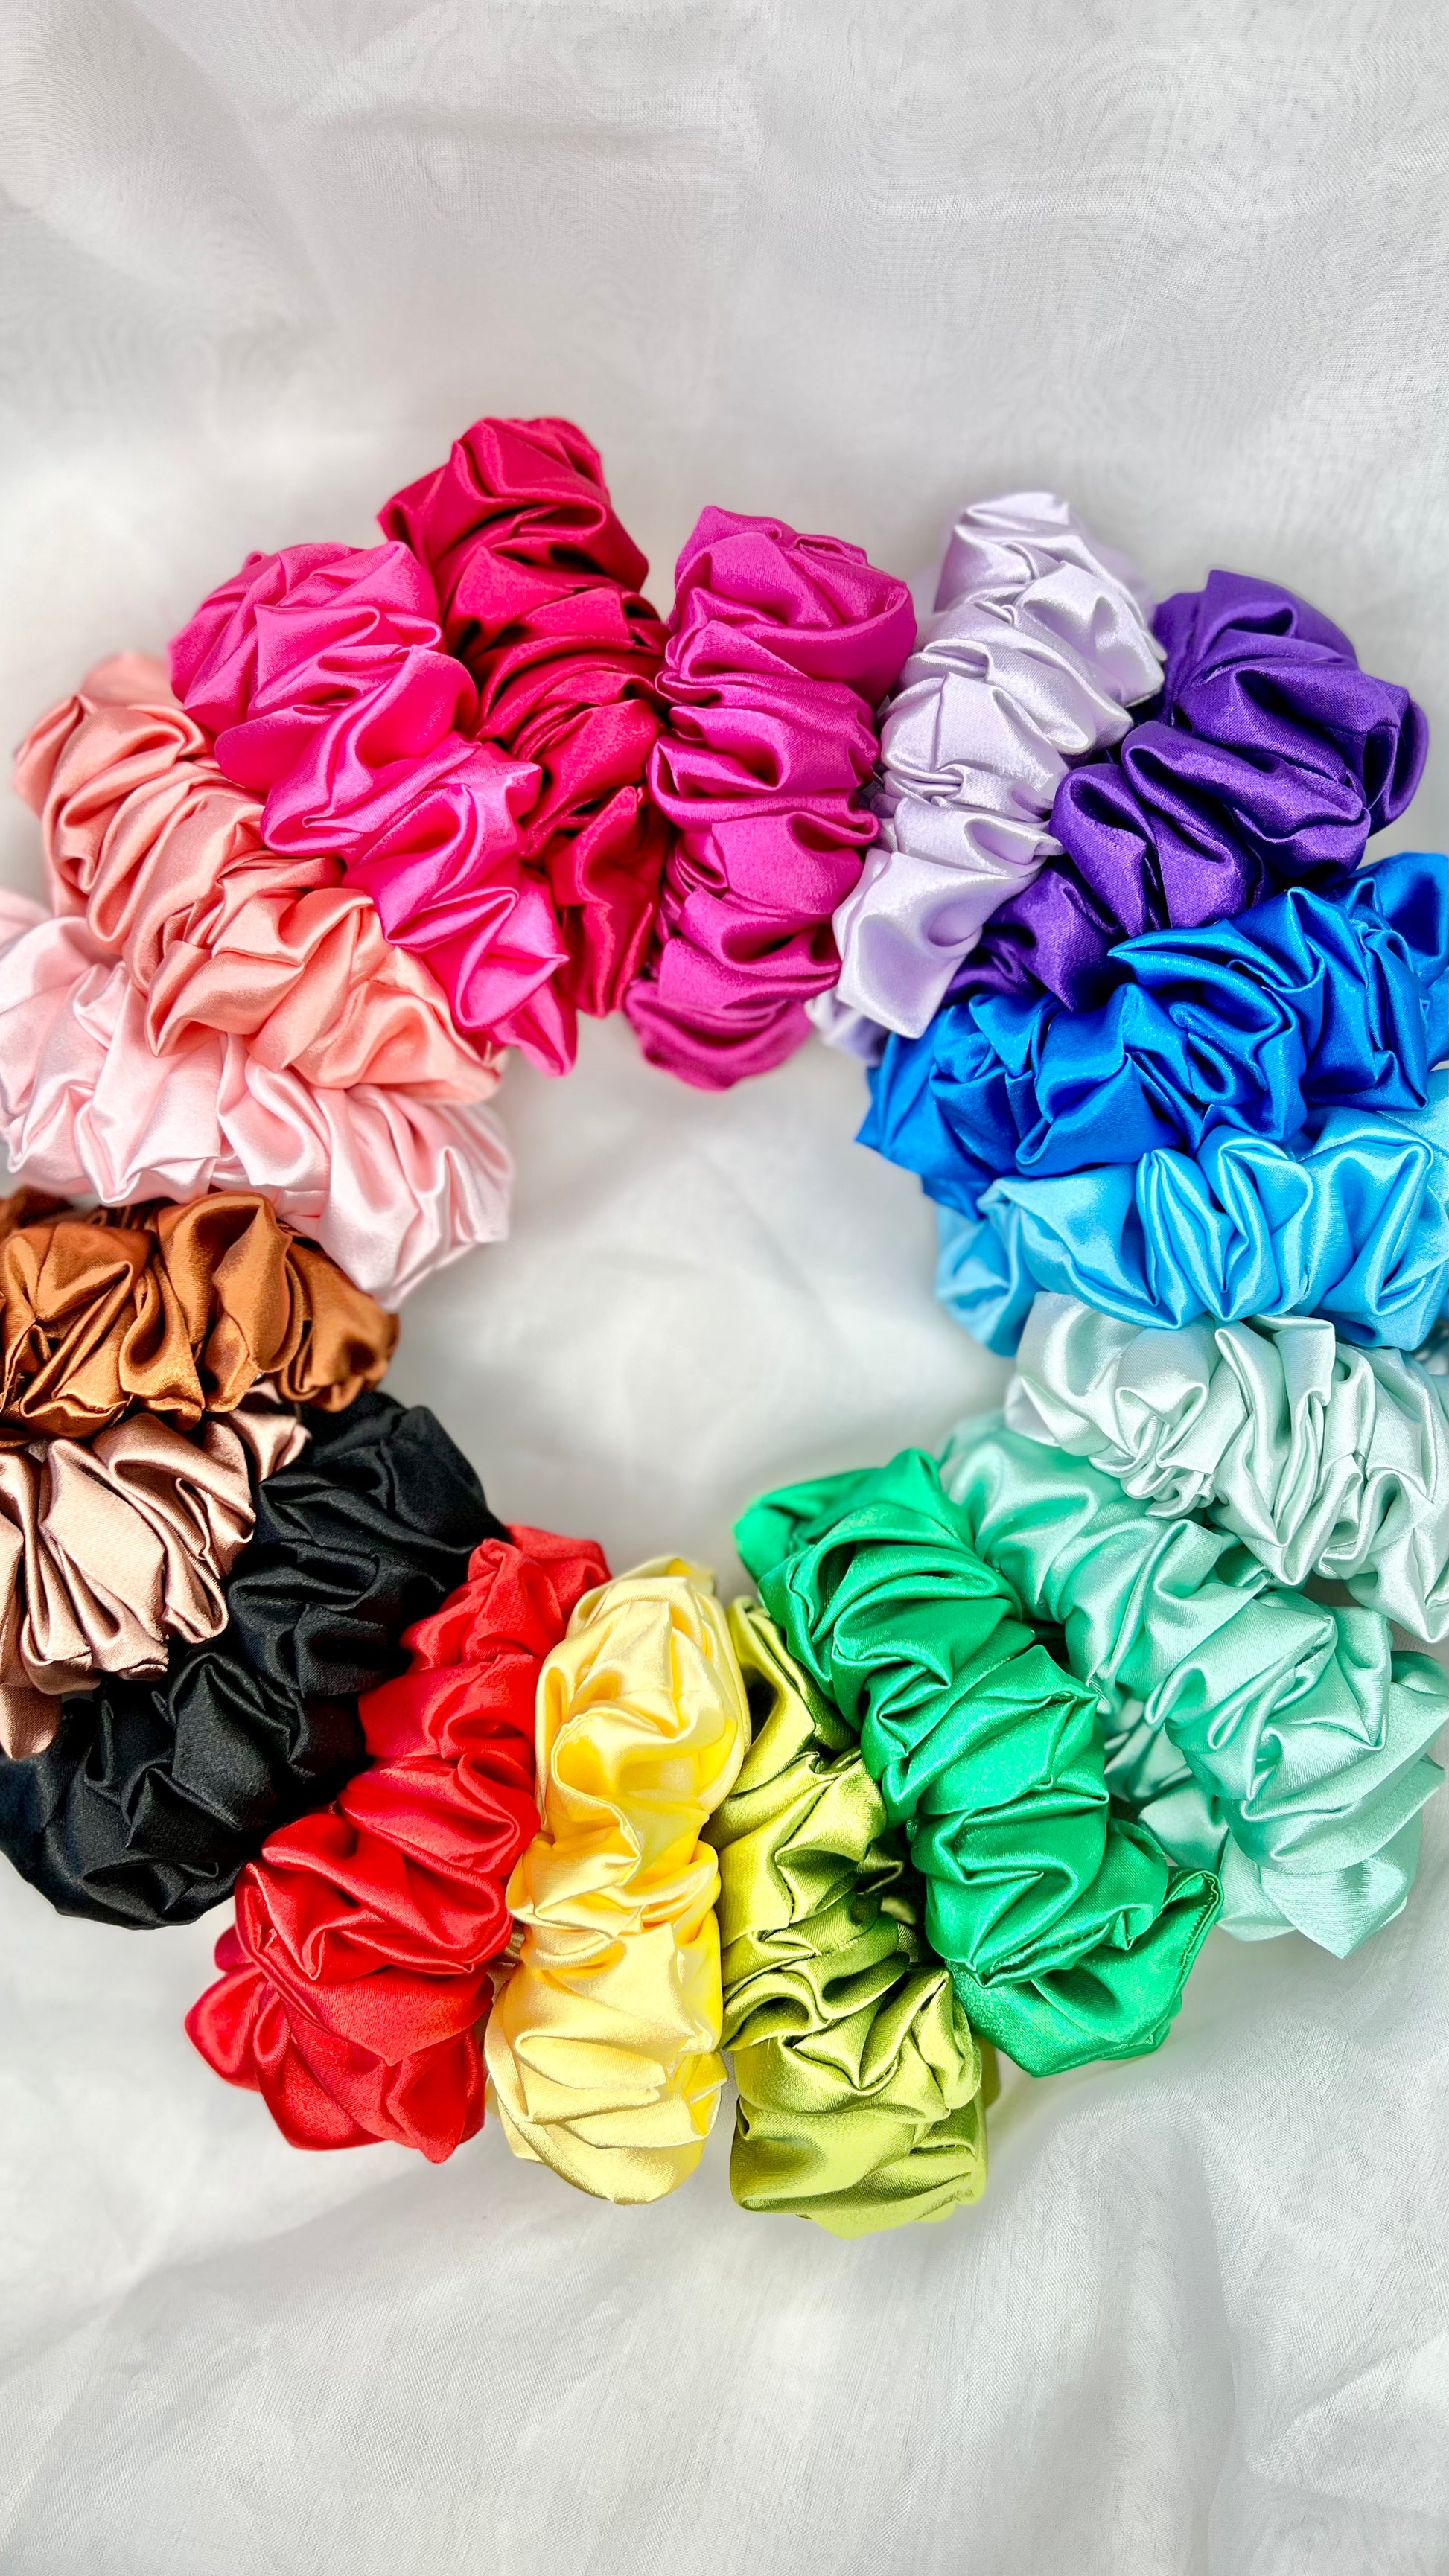 Berry Sweet XL Scrunchie: 
Say hello to our newest addition to the scrunchie family - oversized Berry Sweet XL scrunchies!  
Material: Satin (96% polyester, 4% elastane)
Dimensions: 11cm diam - Ciao Bella Dresses 